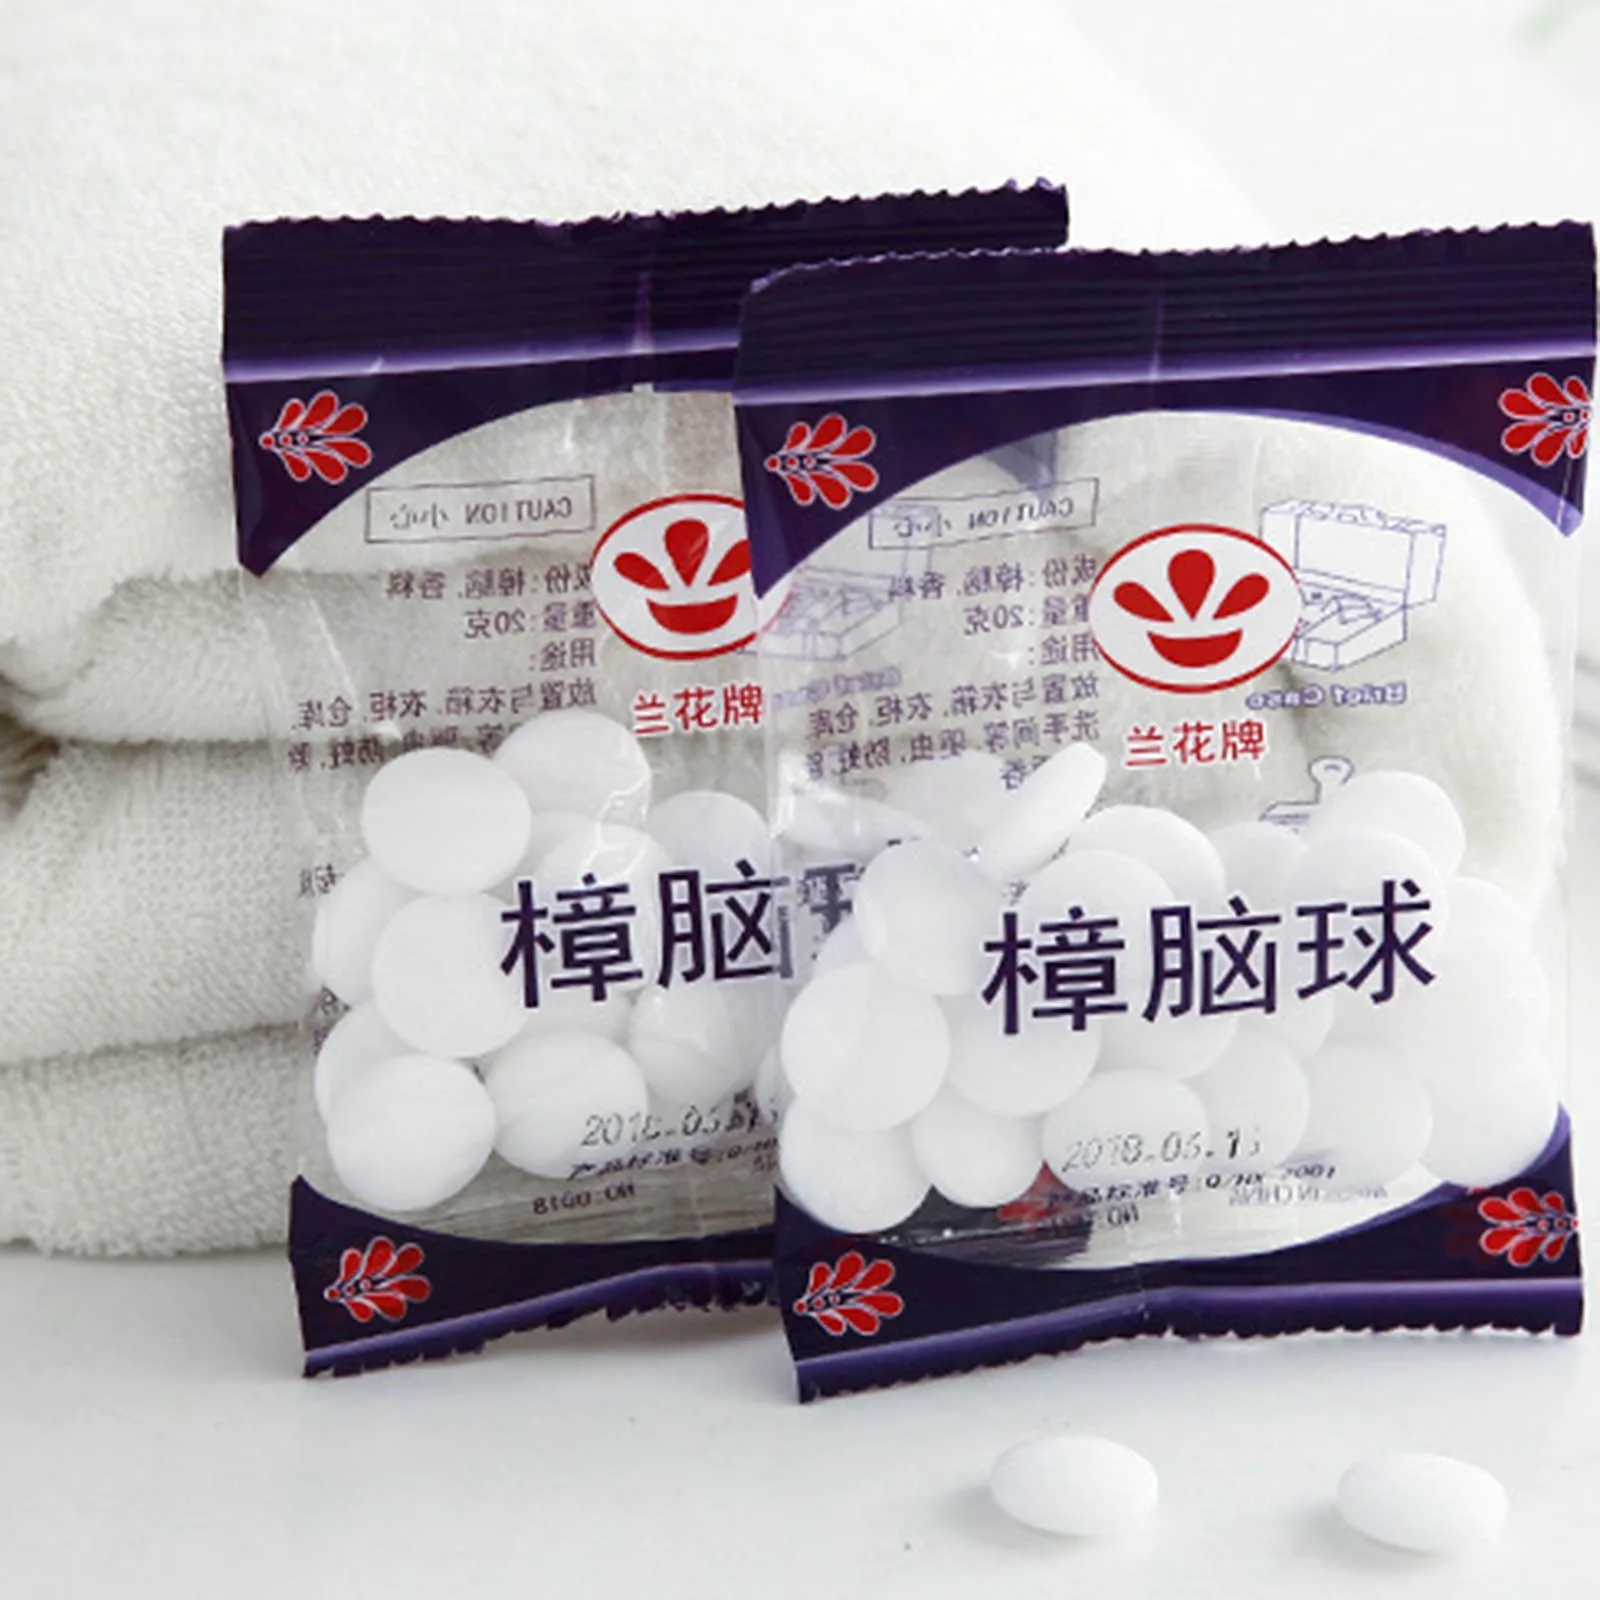 https://ae01.alicdn.com/kf/Se922c29de5164e6084db40423f99ae74S/Mothballs-Camphor-Pill-Wardrobe-Mildew-And-Insect-Resistant-Aromatic-And-Odor-Free-Household-Use-Anti-Moth.jpg